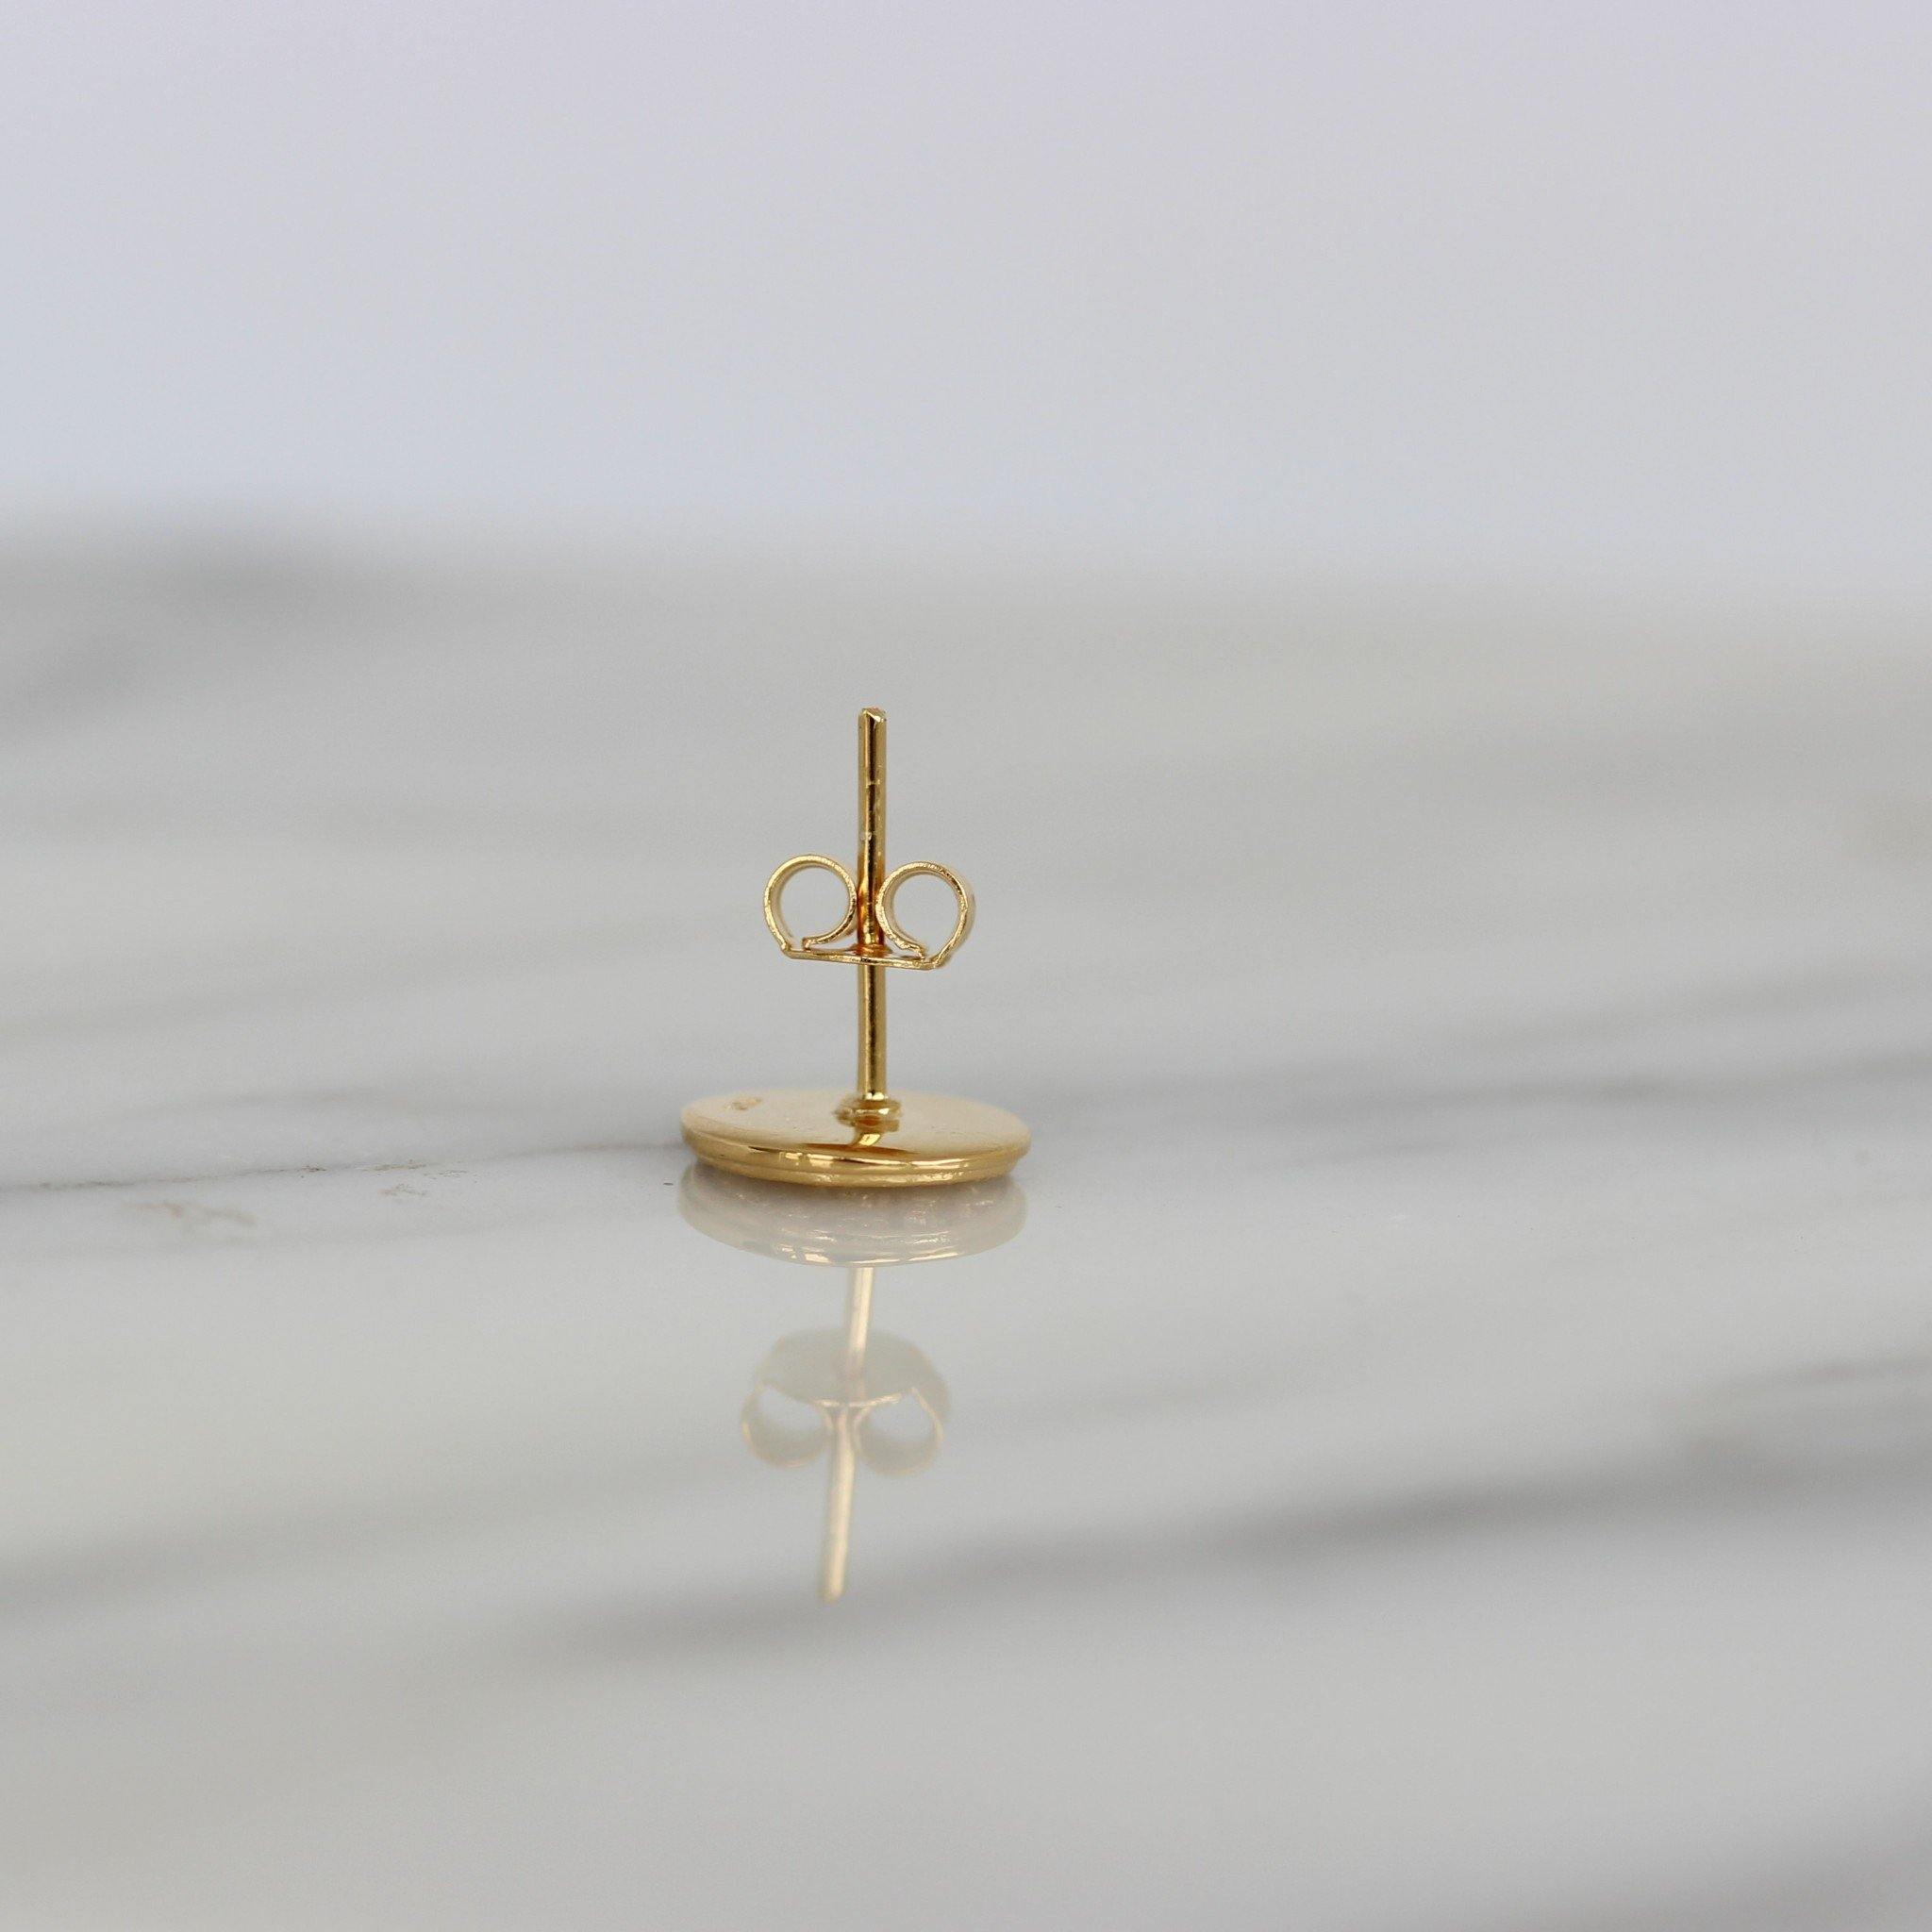 10mm Round Anchor Medallion Stud Earrings - Yellow Gold Plated Sterling Silver - STERLING SILVER DESIGNS